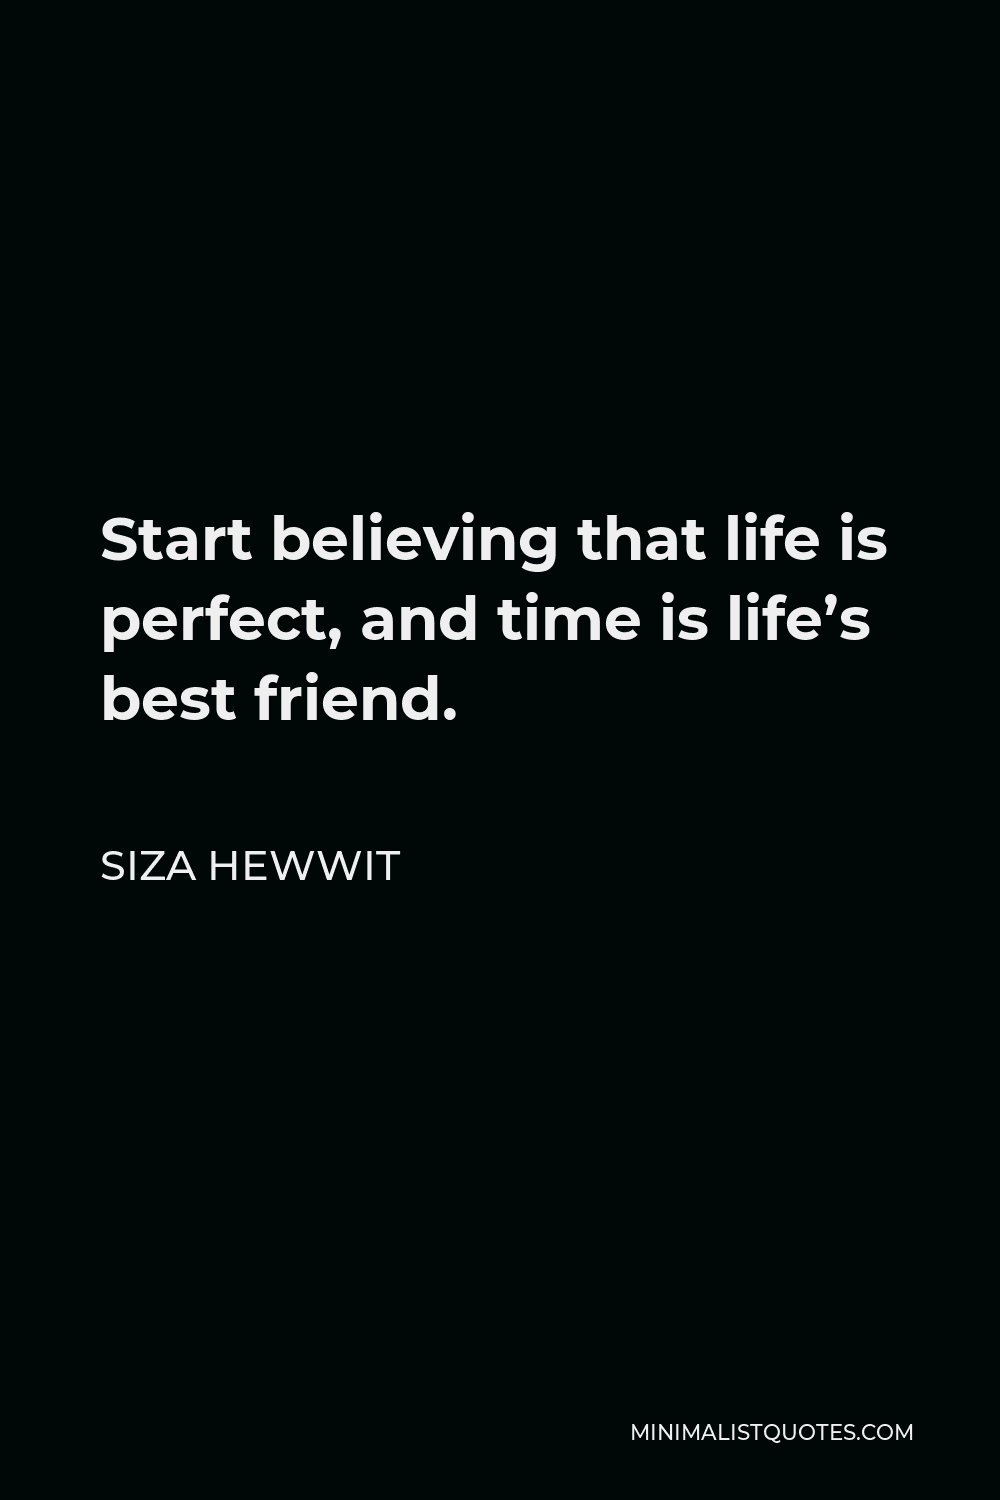 Siza Hewwit Quote - Start believing that life is perfect, and time is life’s best friend.